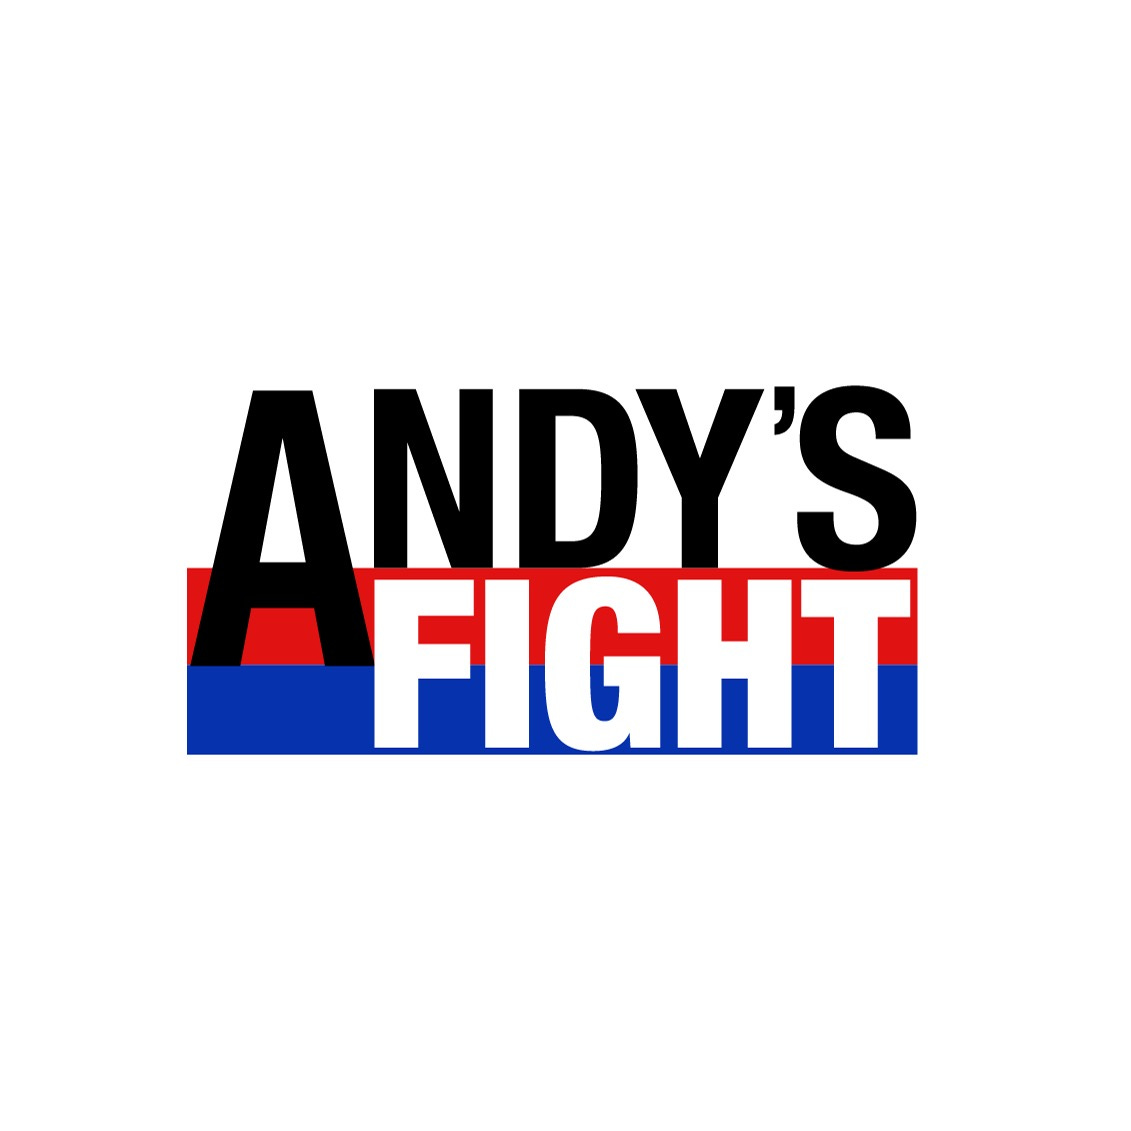 Artwork for Andy's Fight